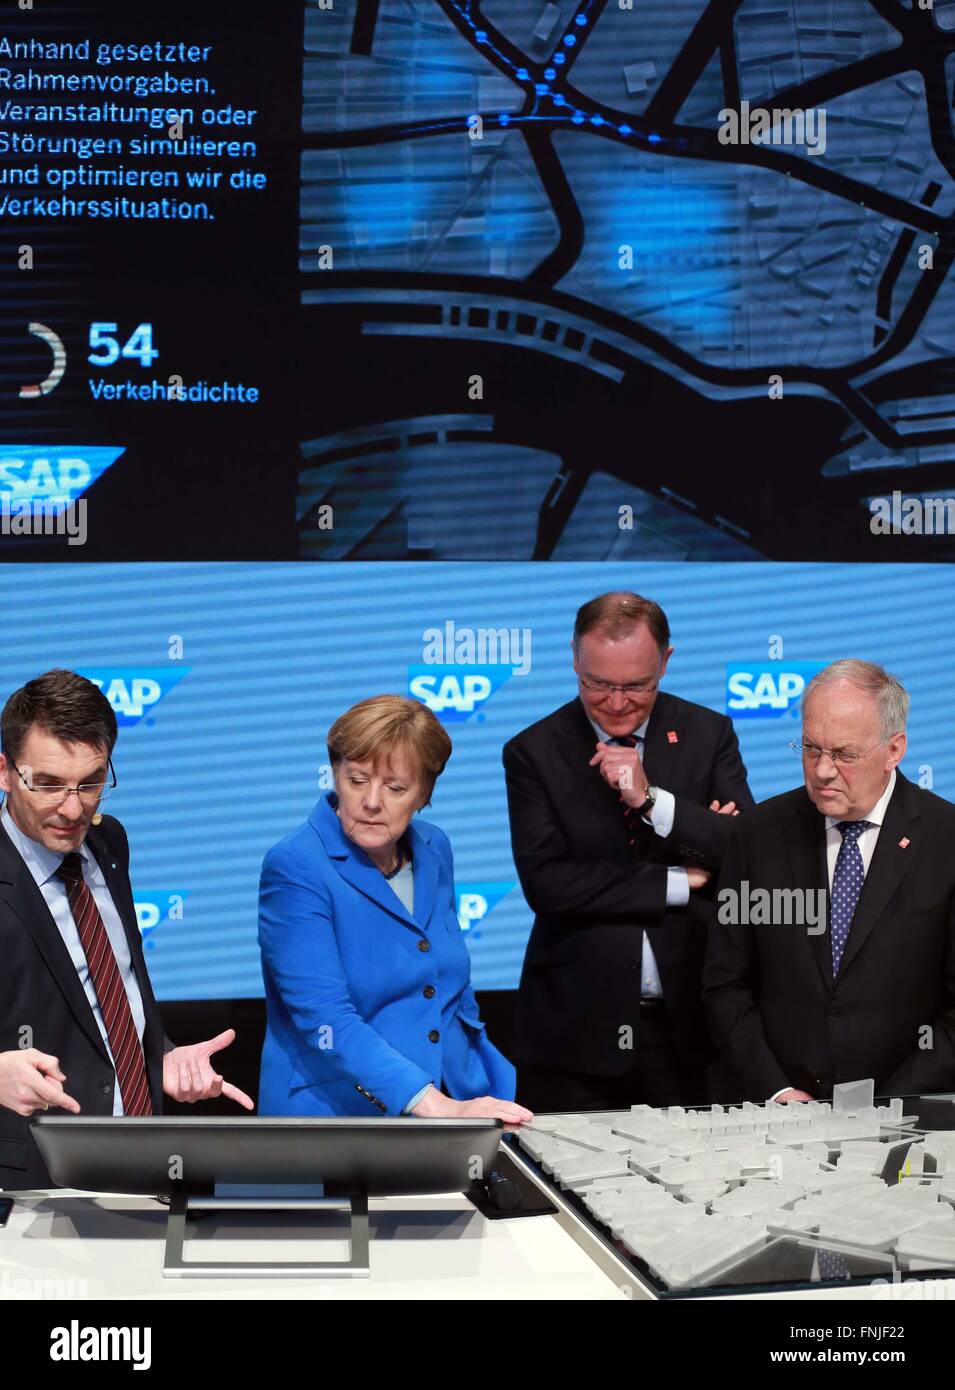 Hanover, Germany. 15th Mar, 2016. German chancellor Angela Merkel (2nd L) and Swiss President Johann Schneider-Ammann (1st R) visit the SAP booth during their visit to the CeBIT 2016 in Hanover, central Germany, on March 15, 2016. Switzerland is the partner country of the CeBIT 2016. Credit:  Luo Huanhuan/Xinhua/Alamy Live News Stock Photo